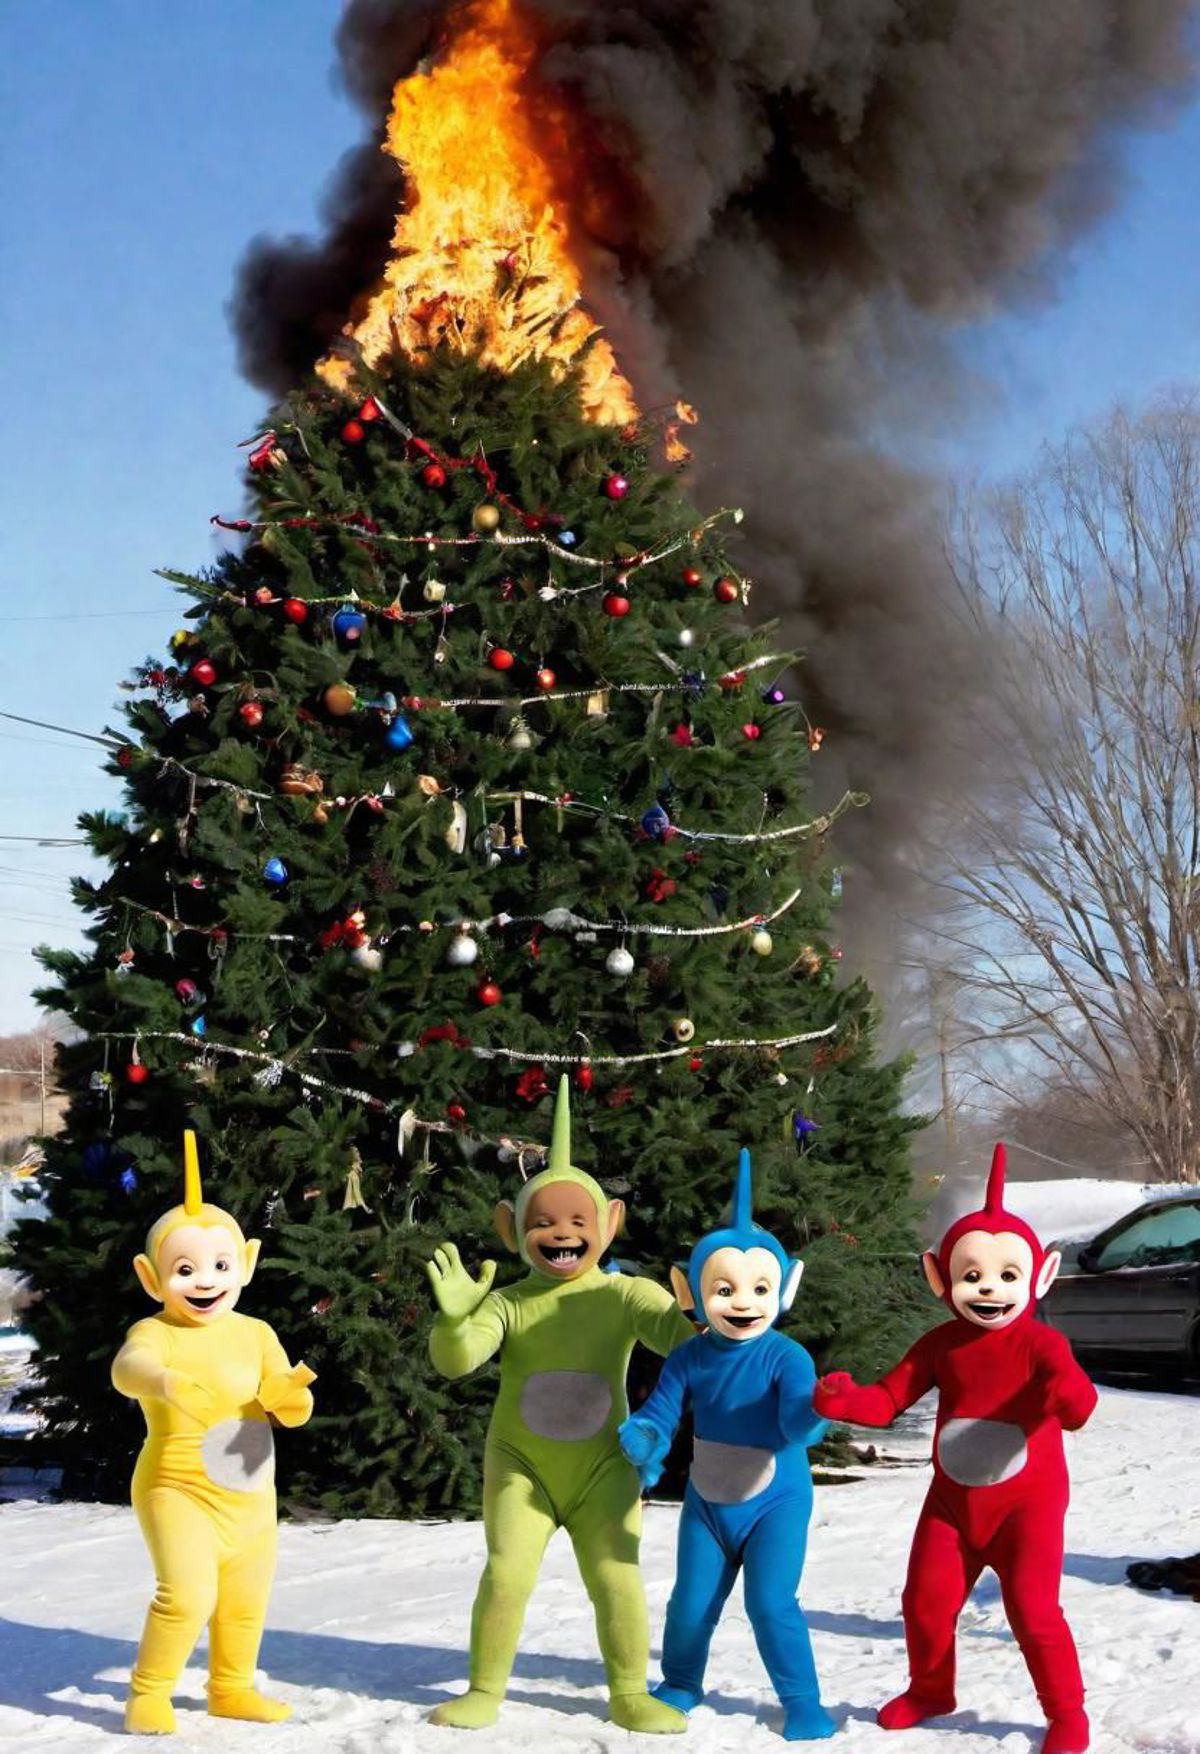 A group of four costumed characters pose in front of a Christmas tree.